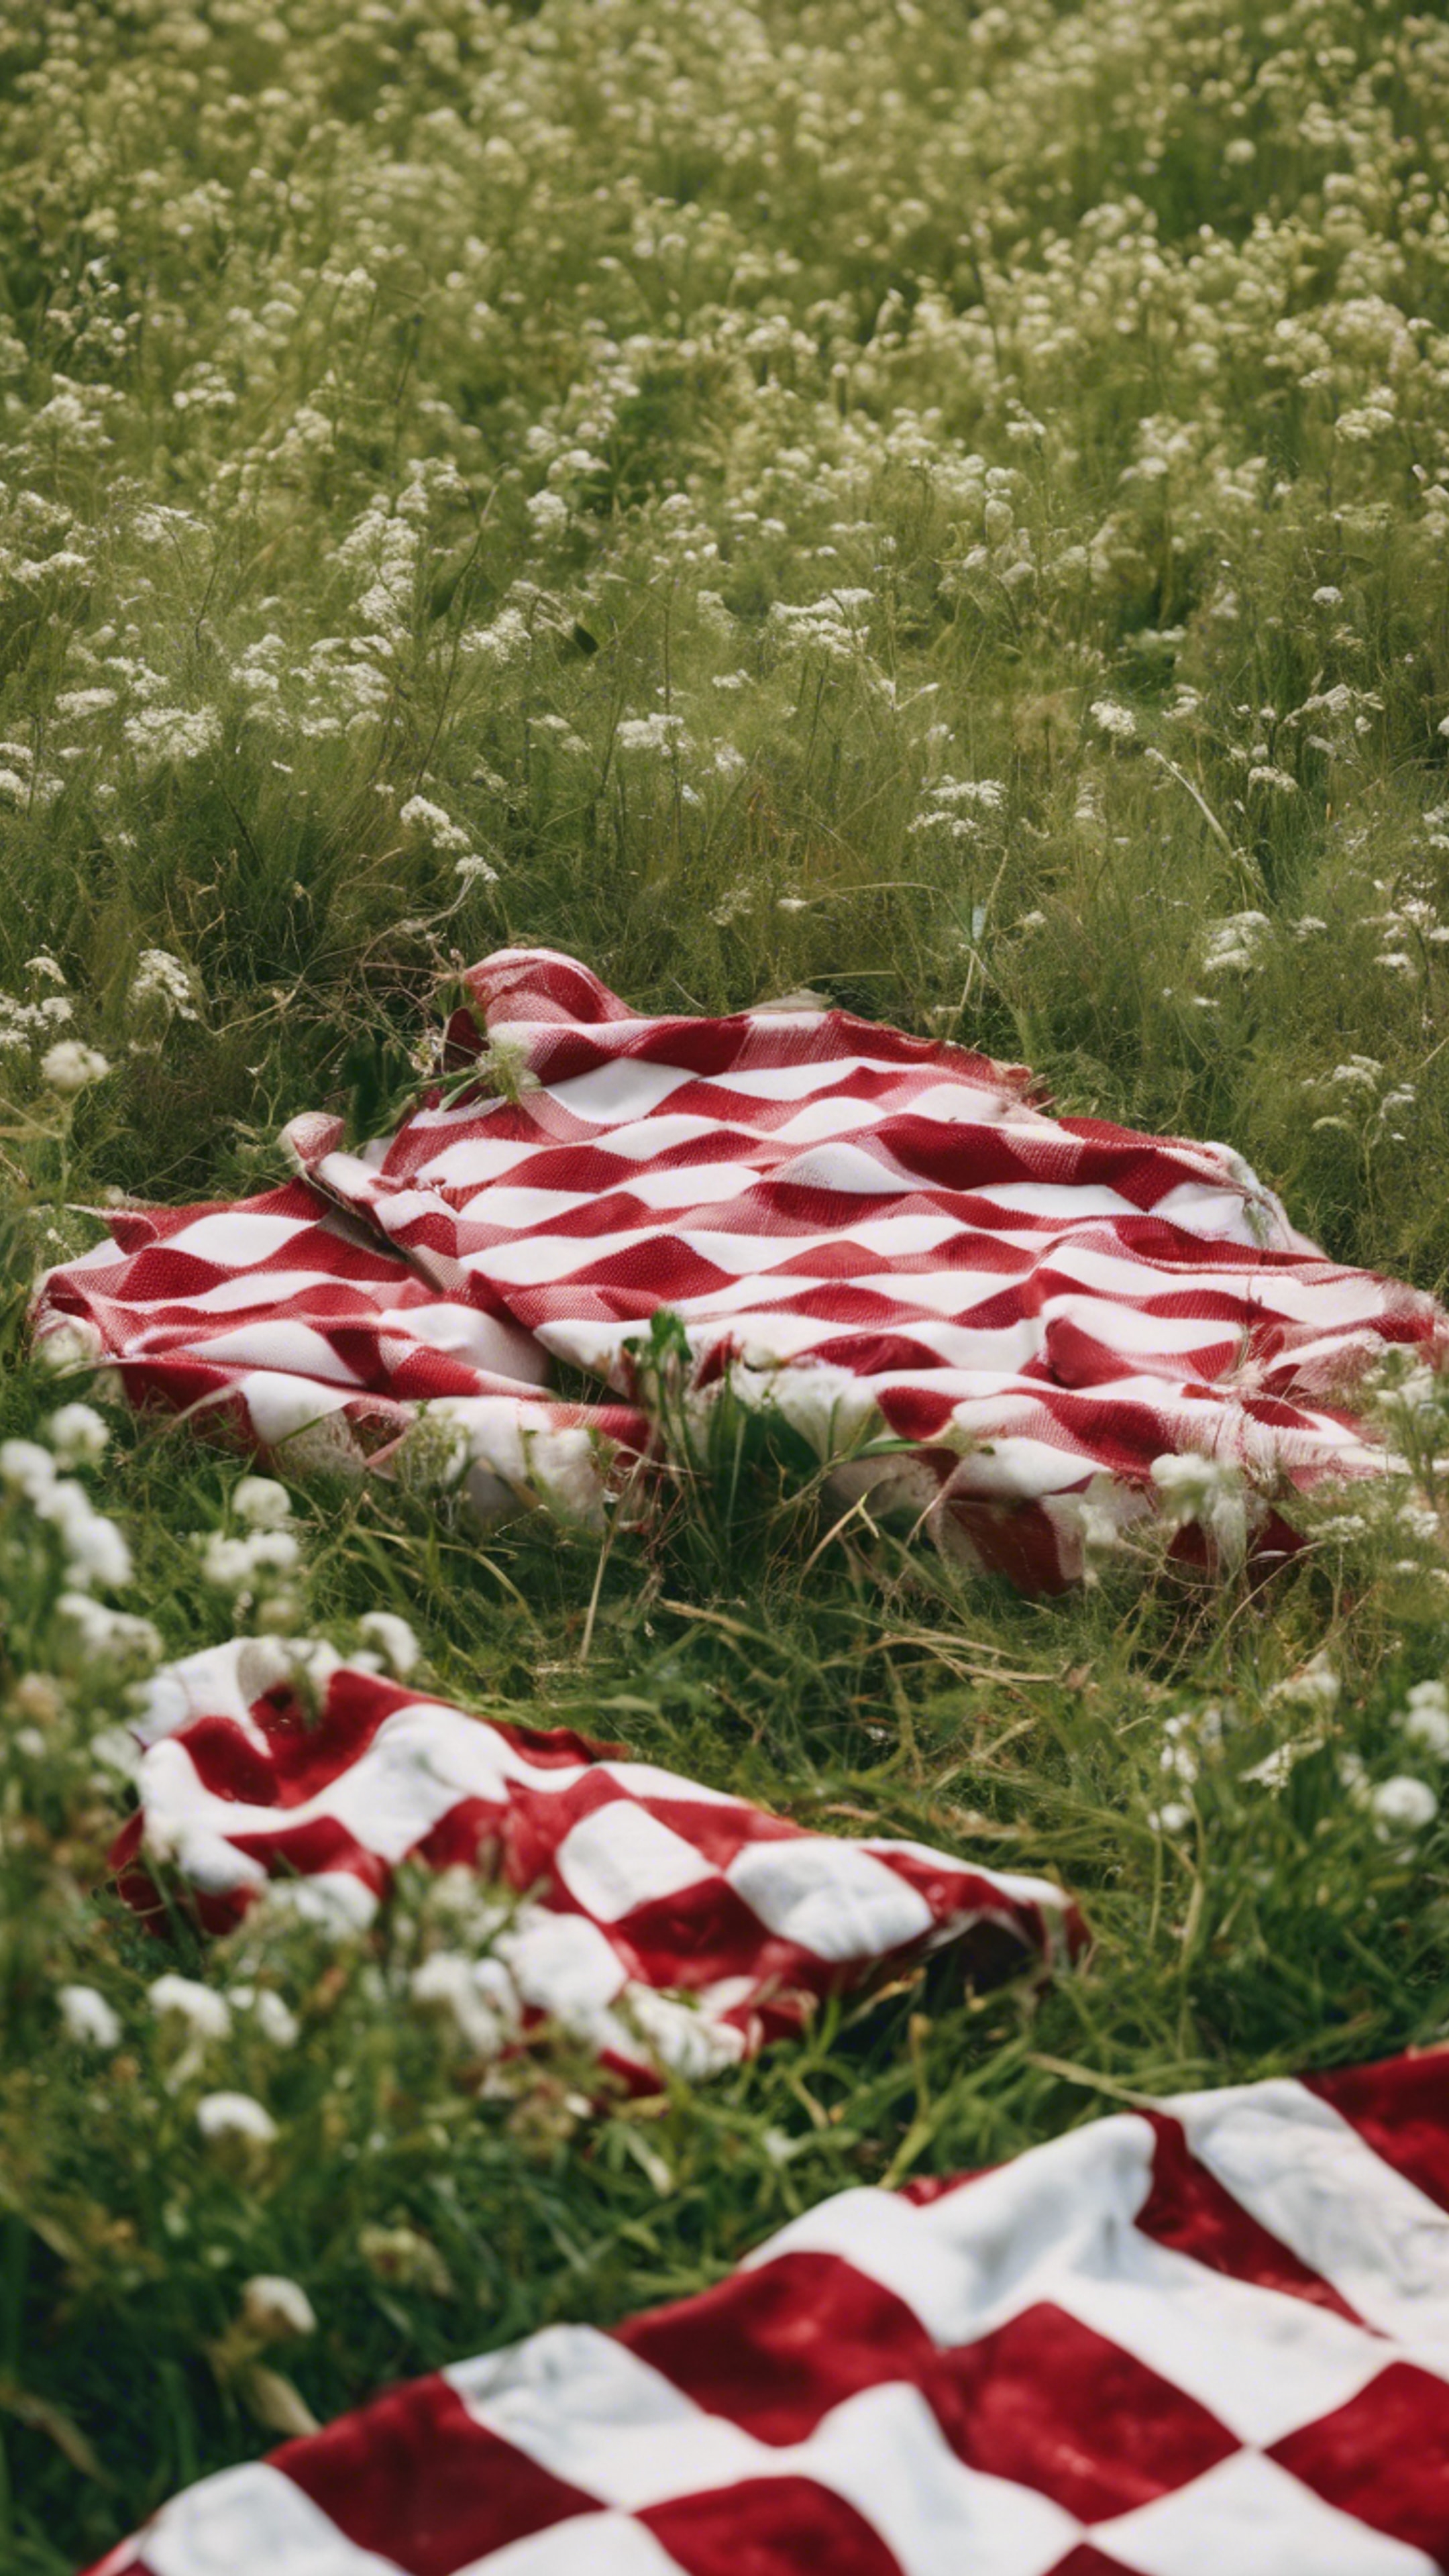 A red and white checkered picnic blanket spread out in a lush green field. Taustakuva[d3f97e971ed8445aa31d]